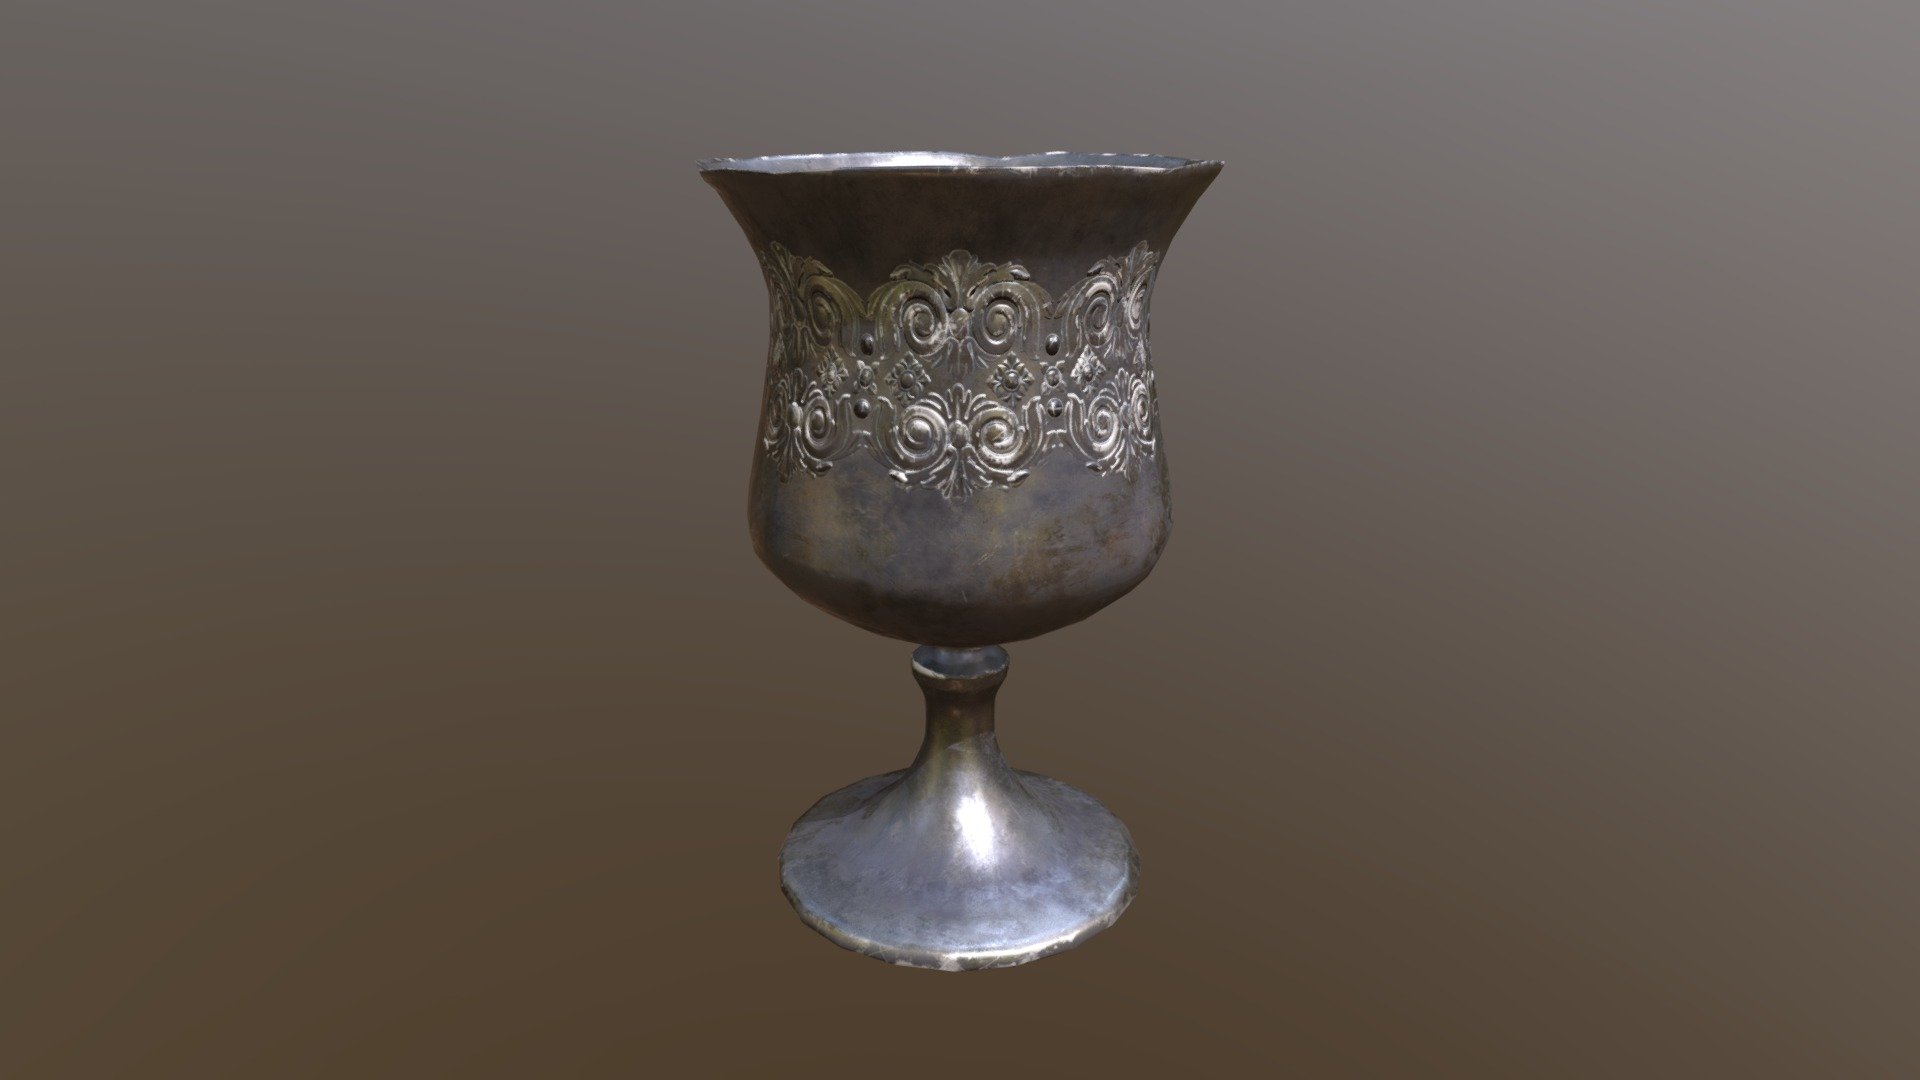 Royal Elegant Chalice 3D Model. This model contains the Royal Elegant Chalice itself 

All modeled in Maya, textured with Substance Painter.

The model was built to scale and is UV unwrapped properly. Contains only one 4K texture set.  

⦁   2944 tris. 

⦁   Contains: .FBX .OBJ and .DAE

⦁   Model has clean topology. No Ngons.

⦁   Built to scale

⦁   Unwrapped UV Map

⦁   4K Texture set

⦁   High quality details

⦁   Based on real life references

⦁   Renders done in Marmoset Toolbag

Polycount: 

Verts 1474

Edges 2968

Faces 1496

Tris 2944

If you have any questions please feel free to ask me 3d model